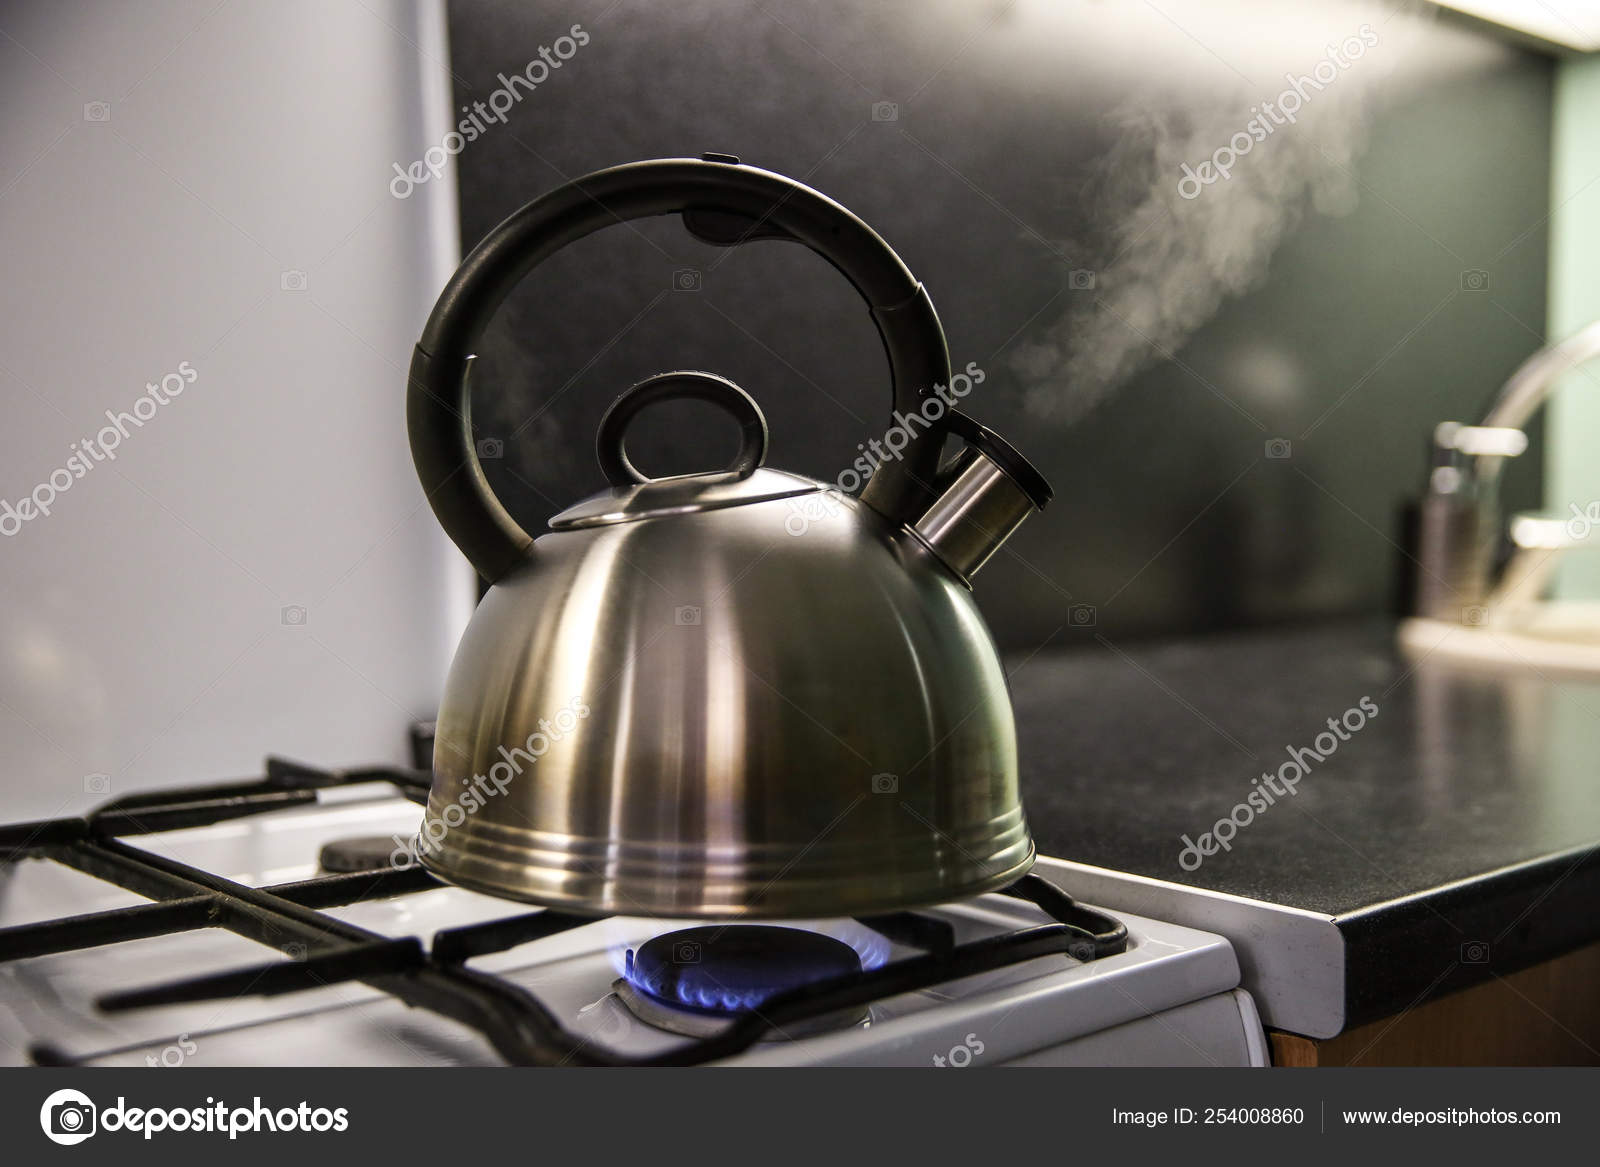 Kettle Boiling Water Kettle Boils Gas Stove Kettle Whistles Gas